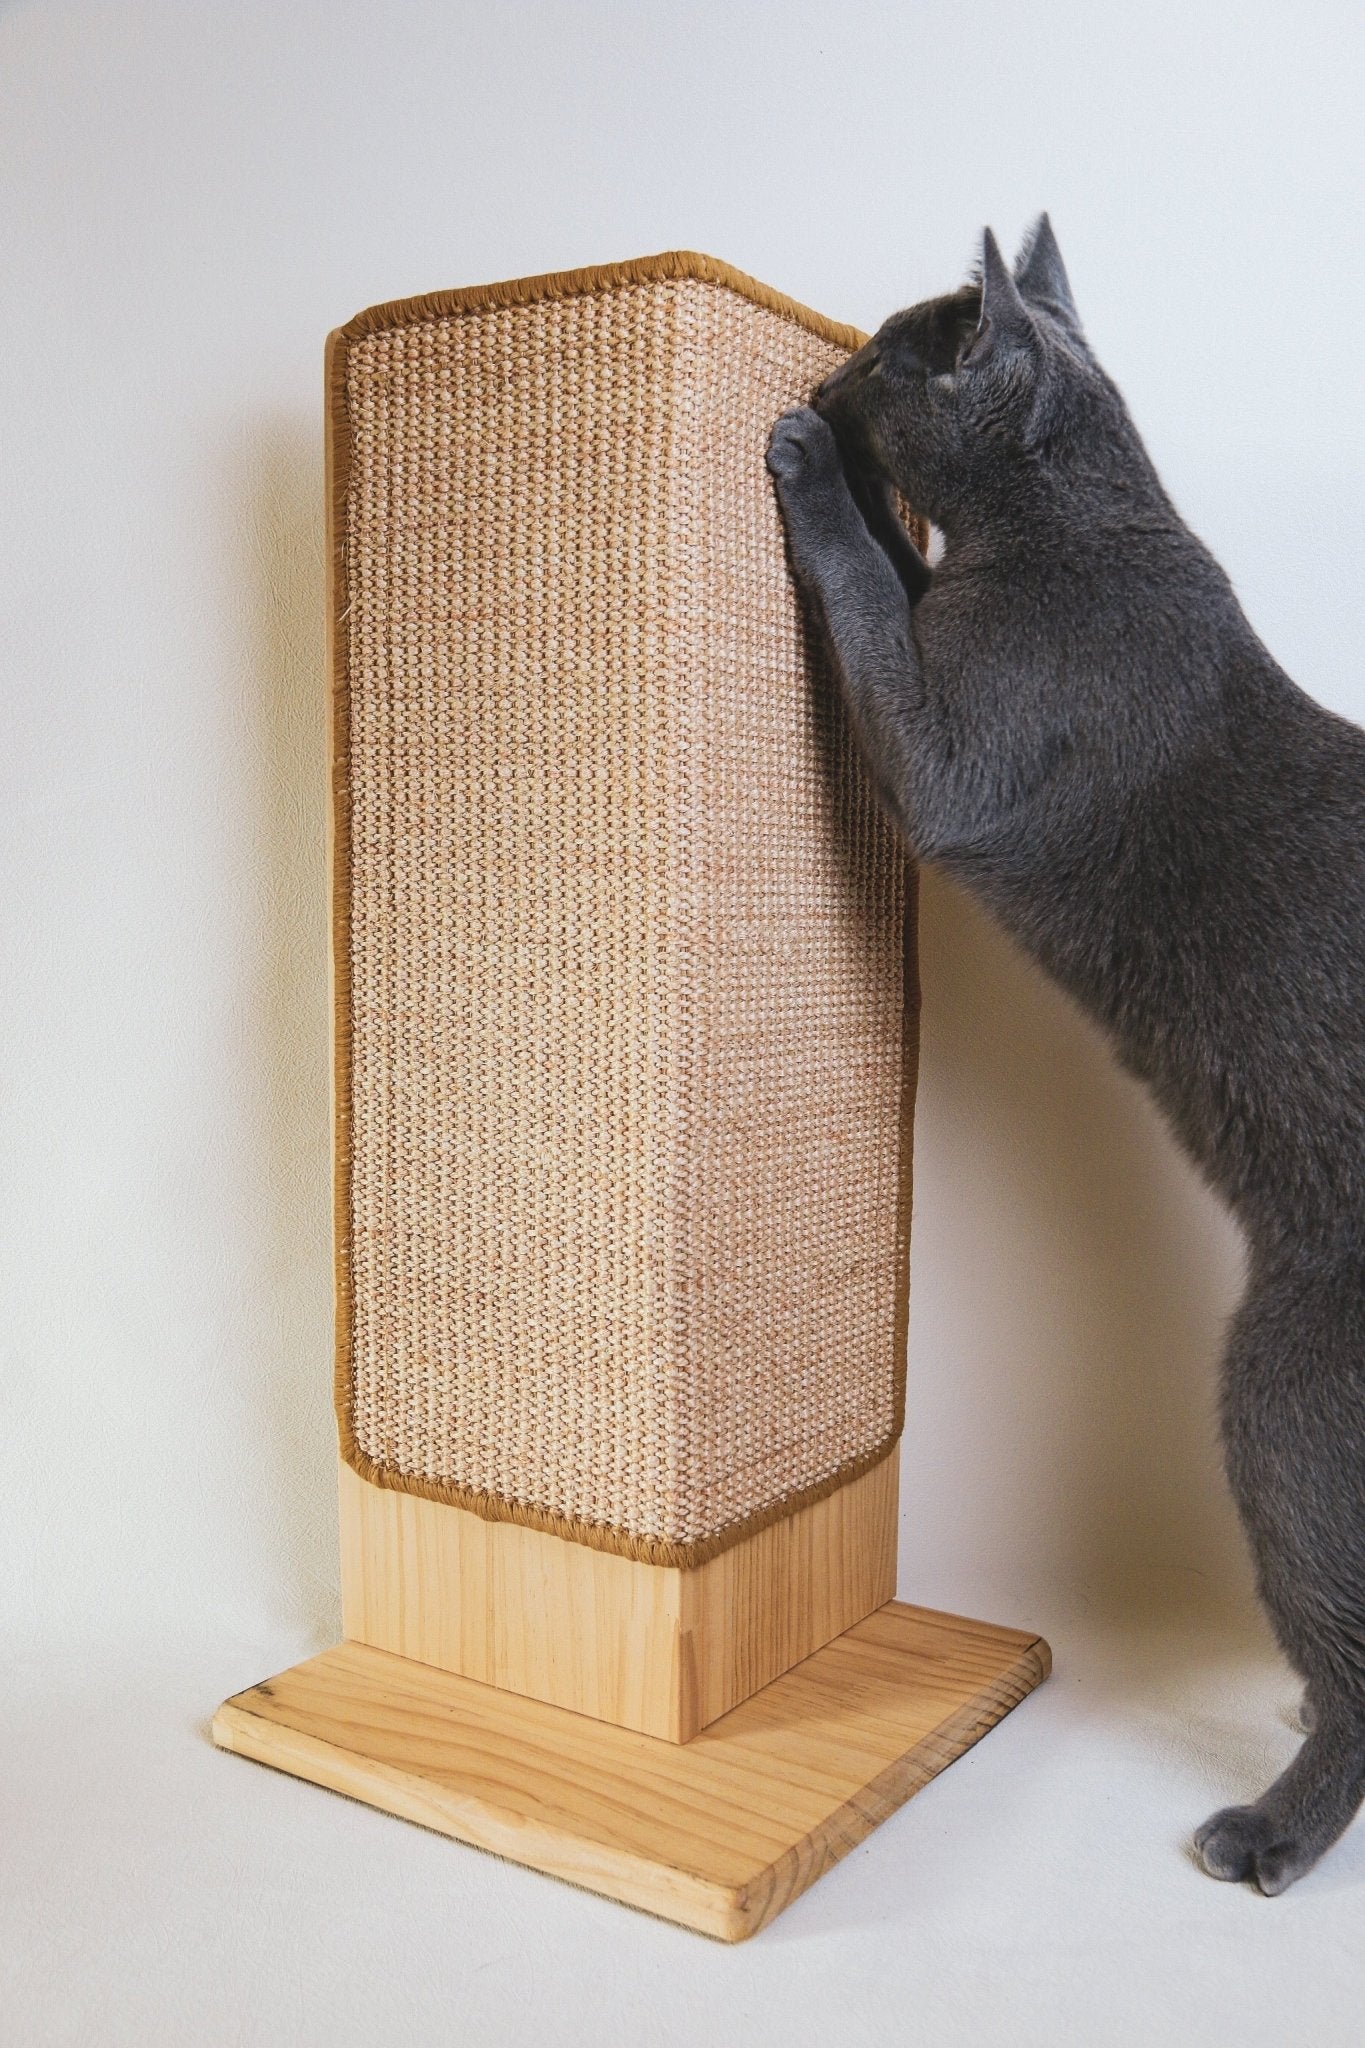 Willow scratching post - Ume's Stash